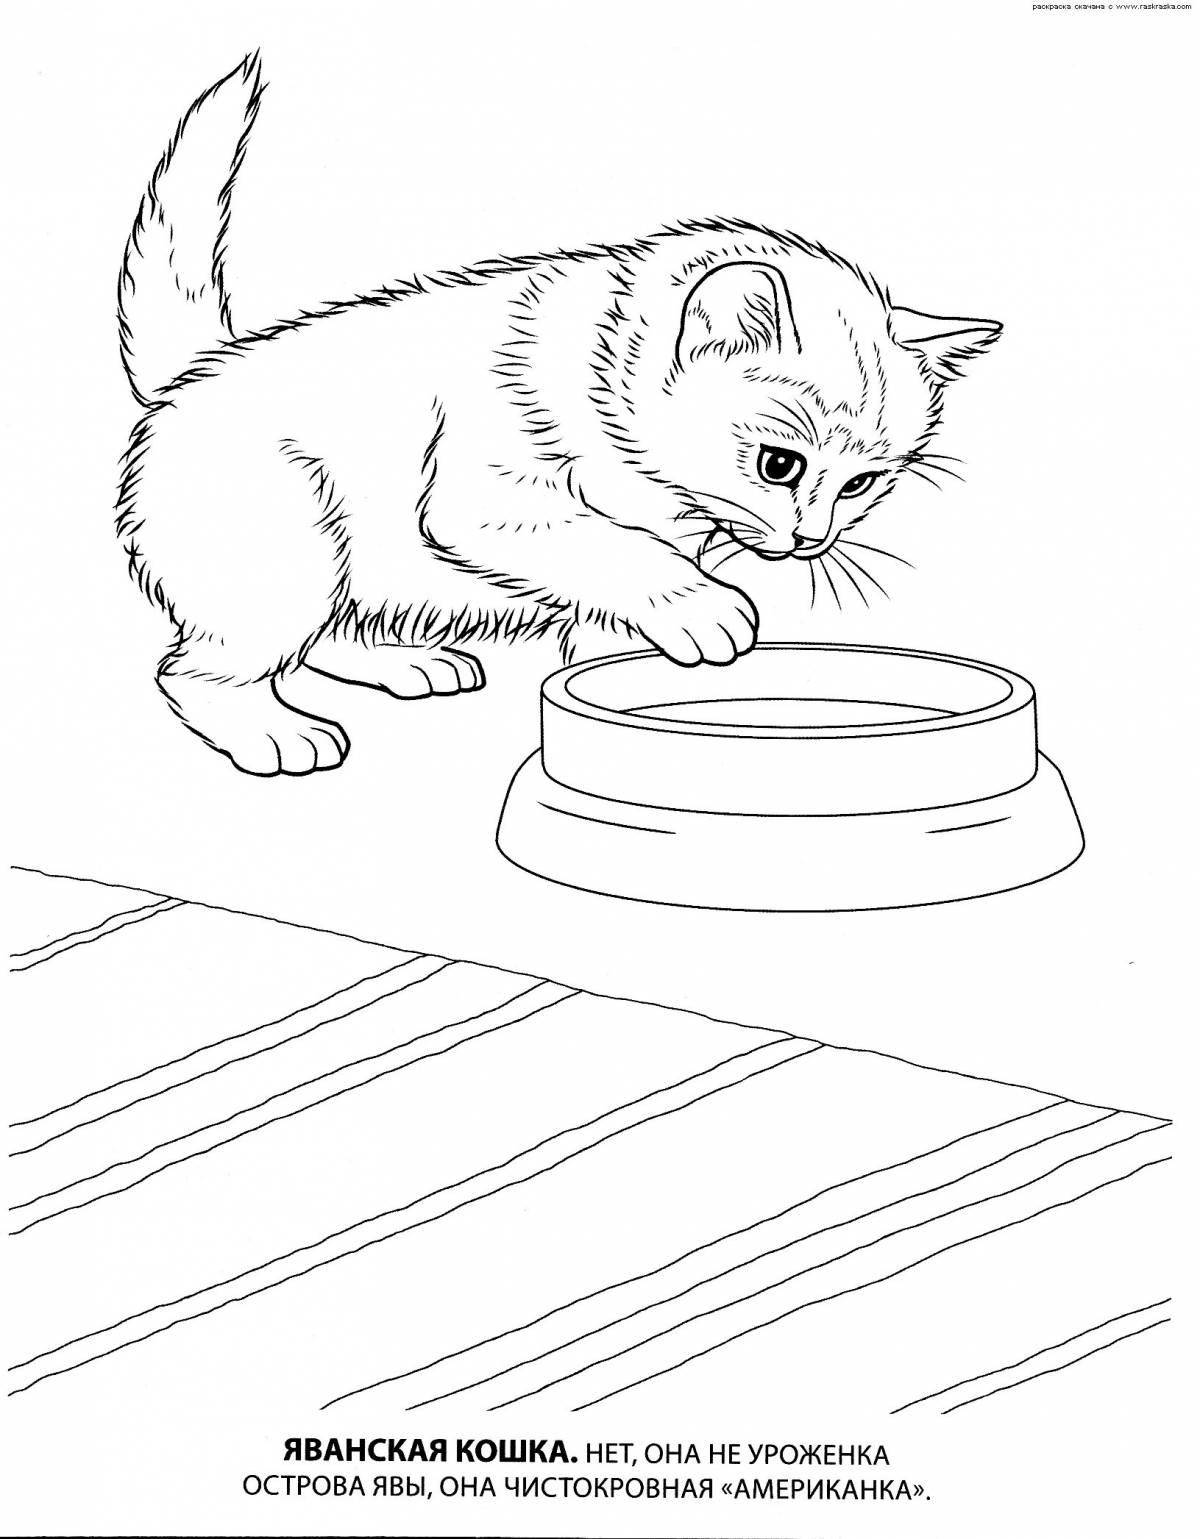 Cute coloring book for girls, cats and kittens